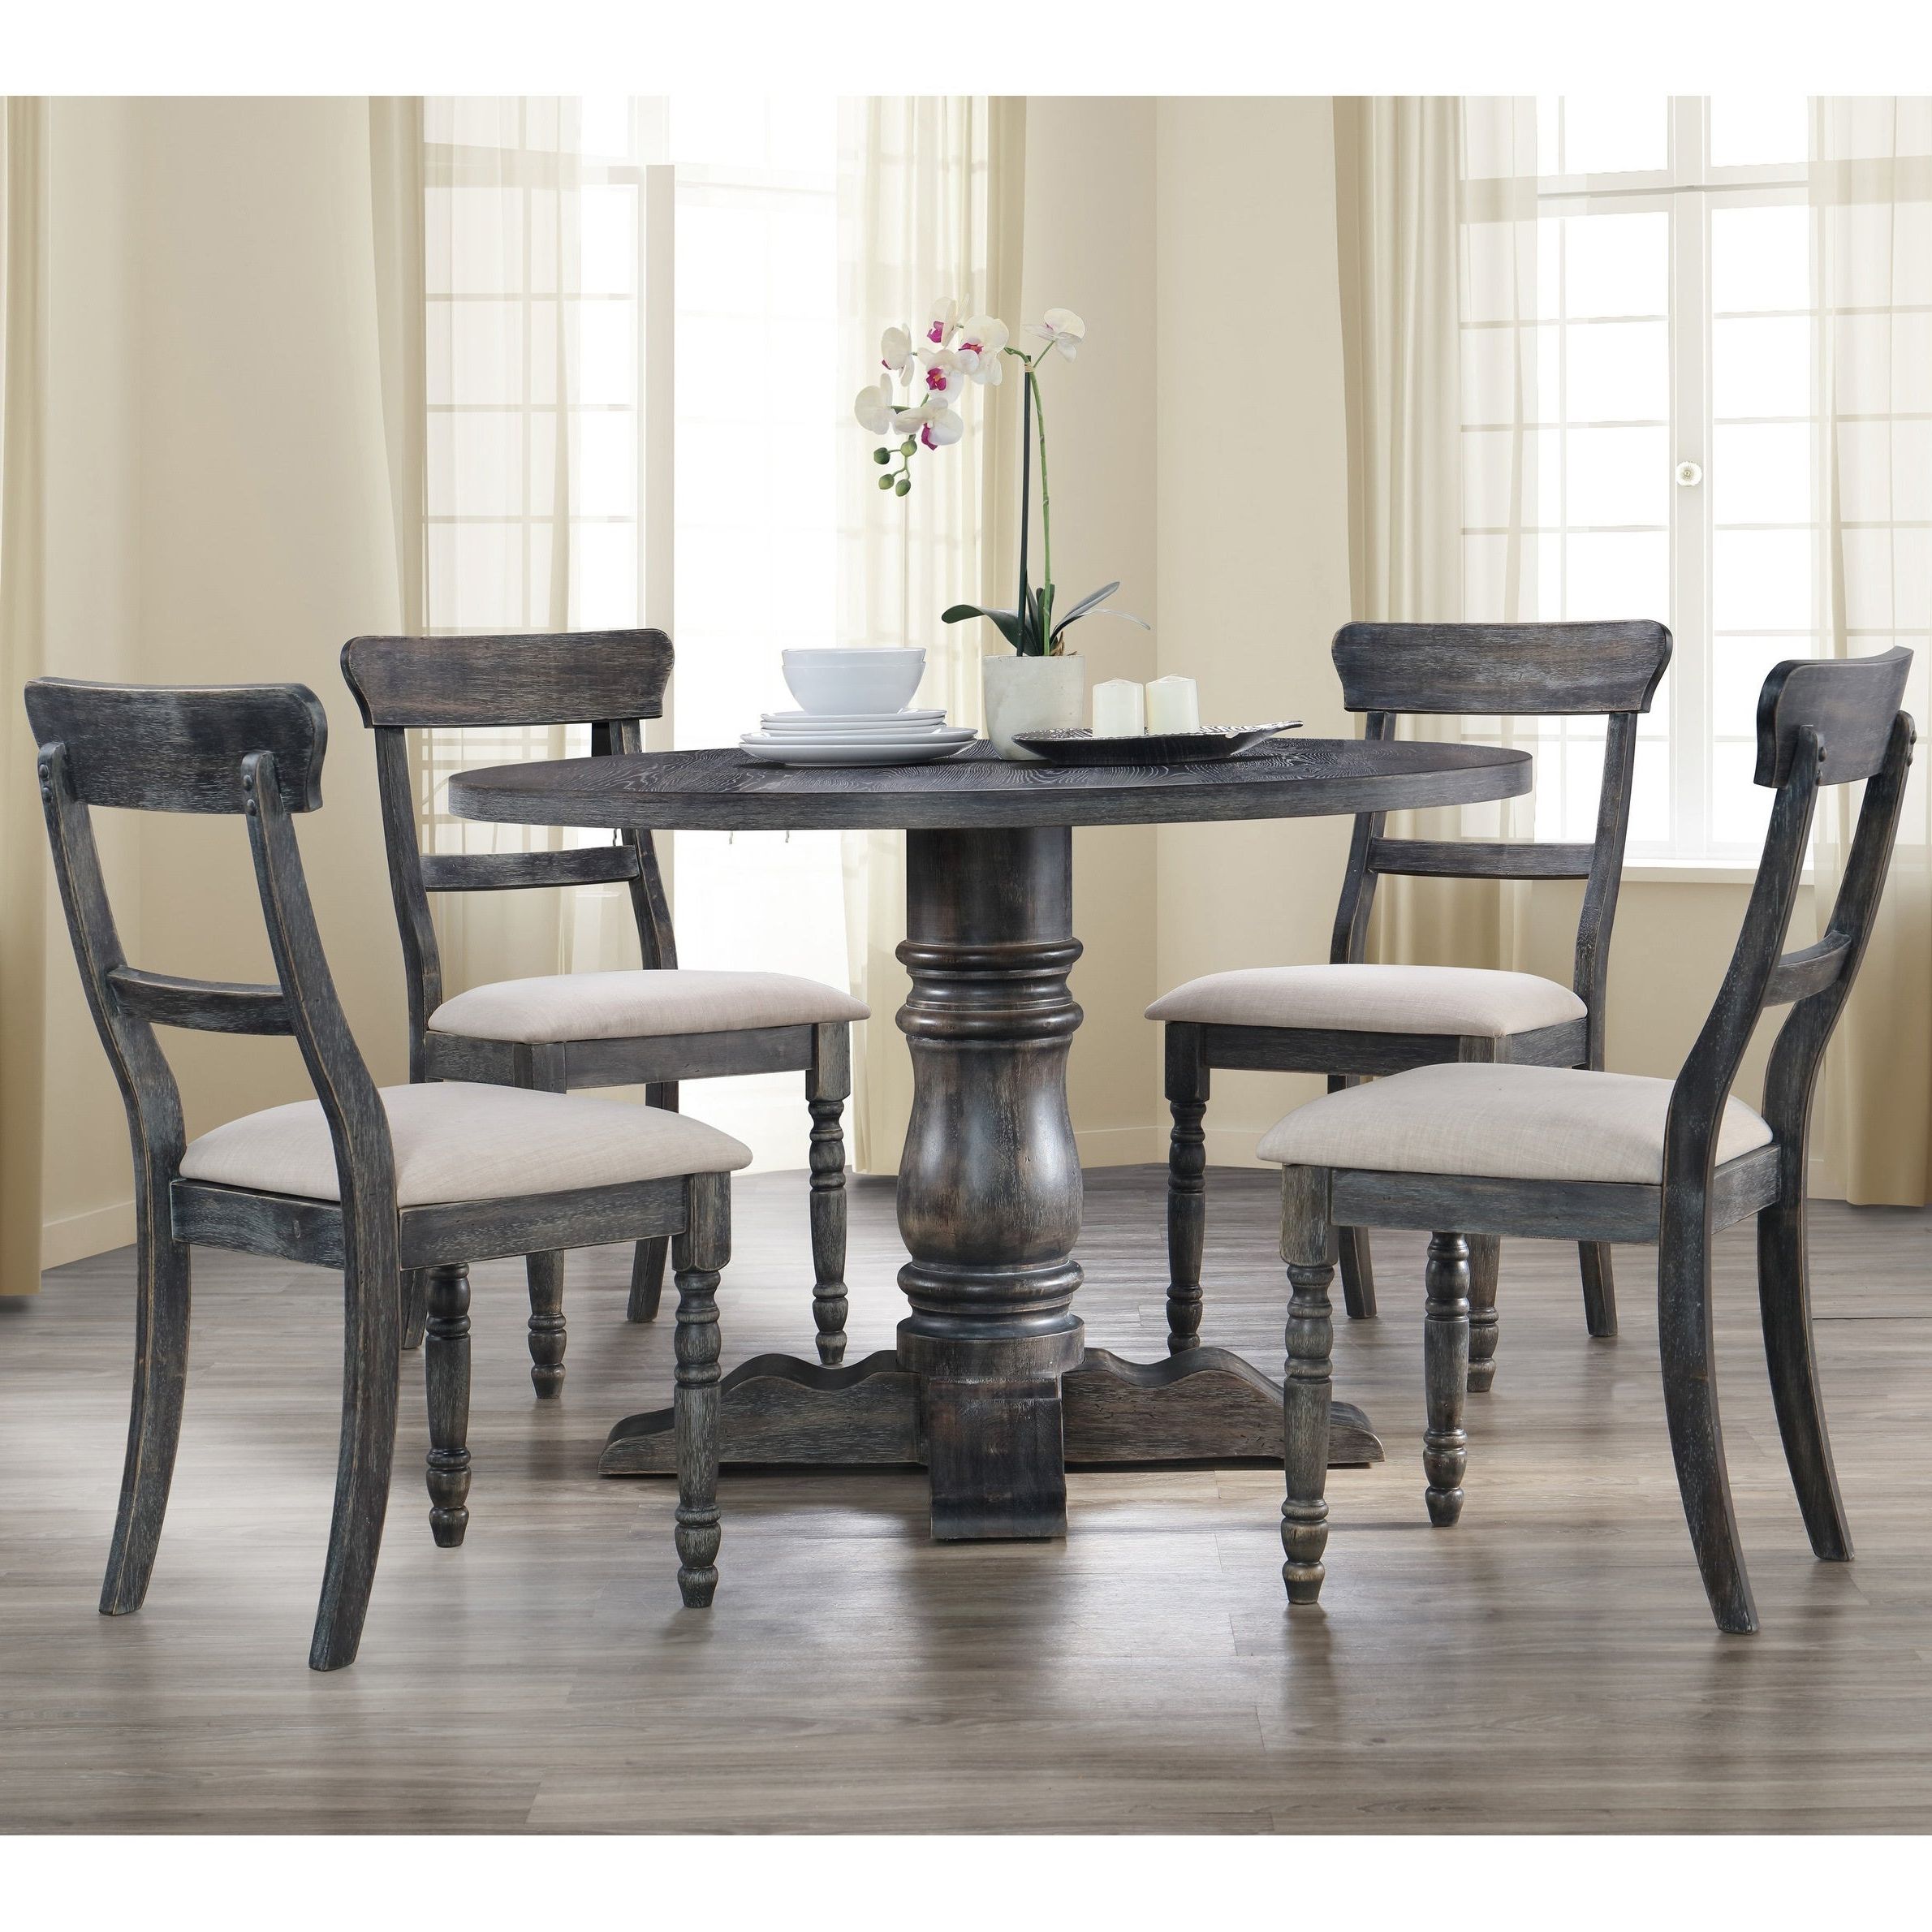 Debby Small Space 3 Piece Dining Sets For Latest Best Master Furniture Weathered Grey 5 Pcs Dinette Set (View 10 of 20)